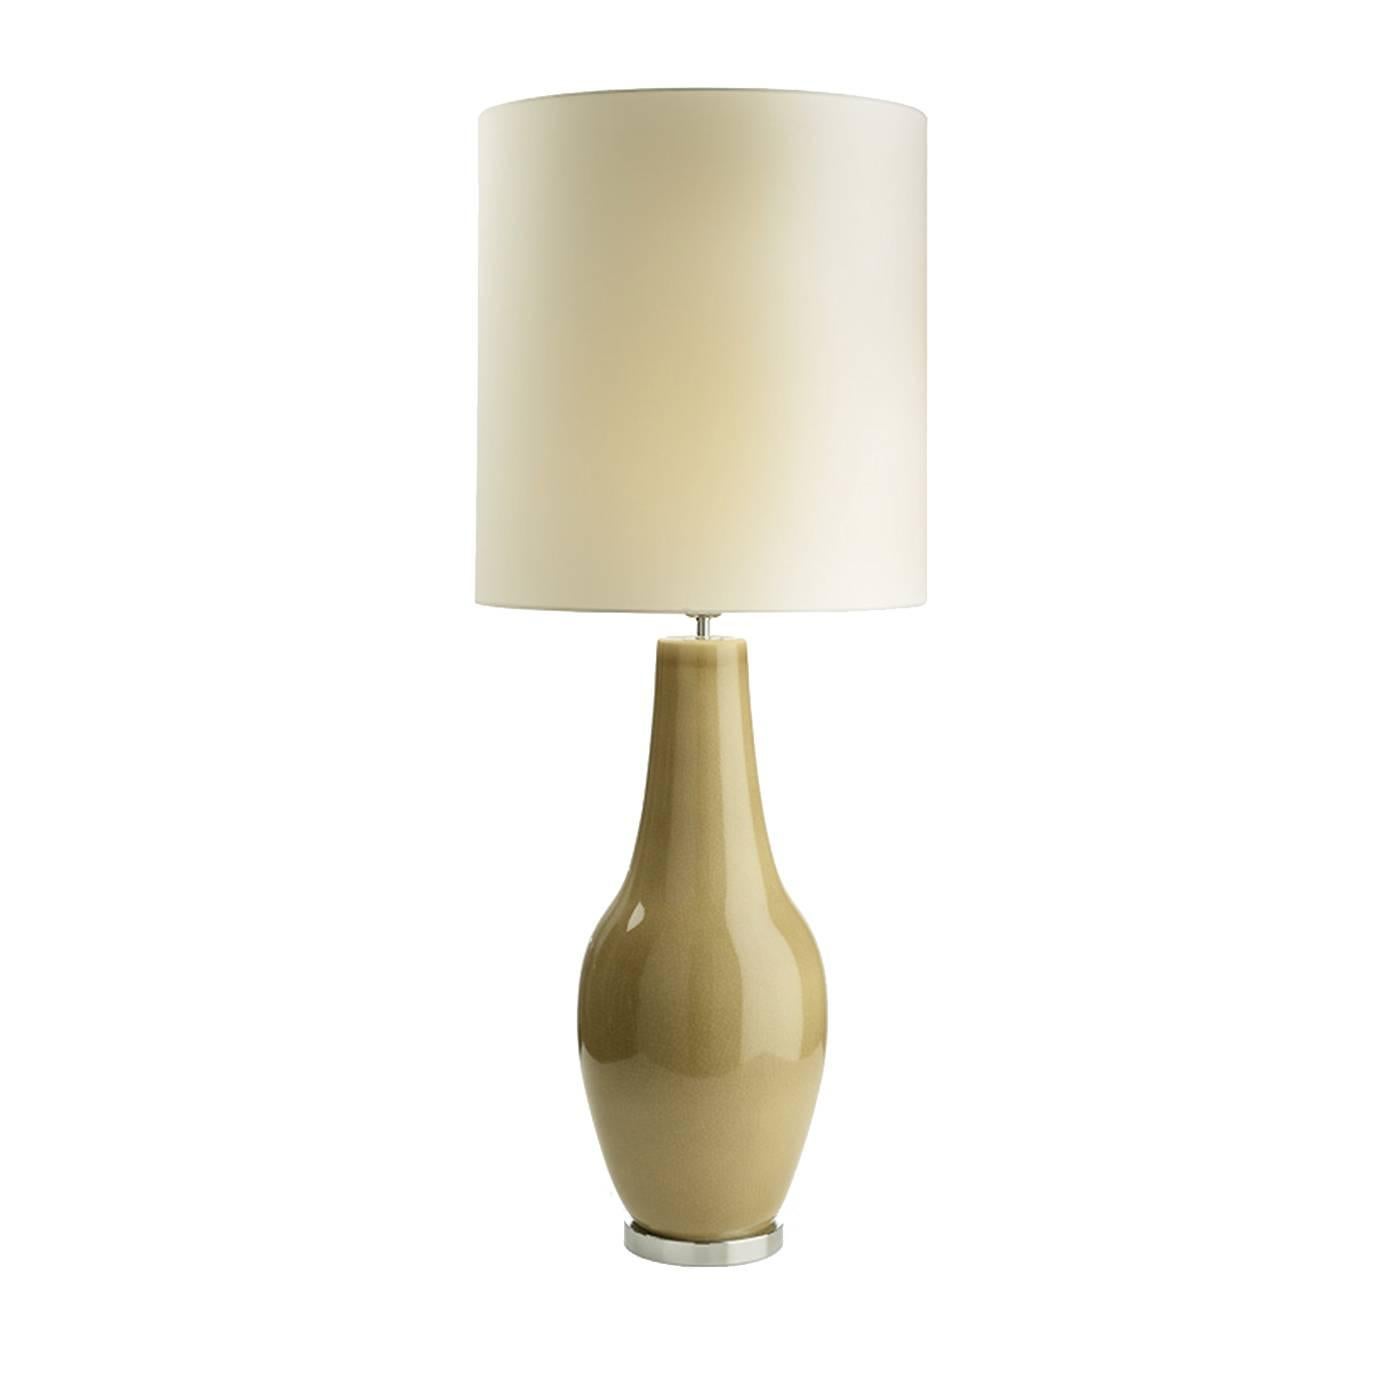 Crafted entirely of ceramic, the structure of this elegant table lamp is elongated and charming, in a delicate shade of beige and with a crackle glaze finish. Resting on a metal round base, this piece is completed with a fabric shade and will be a